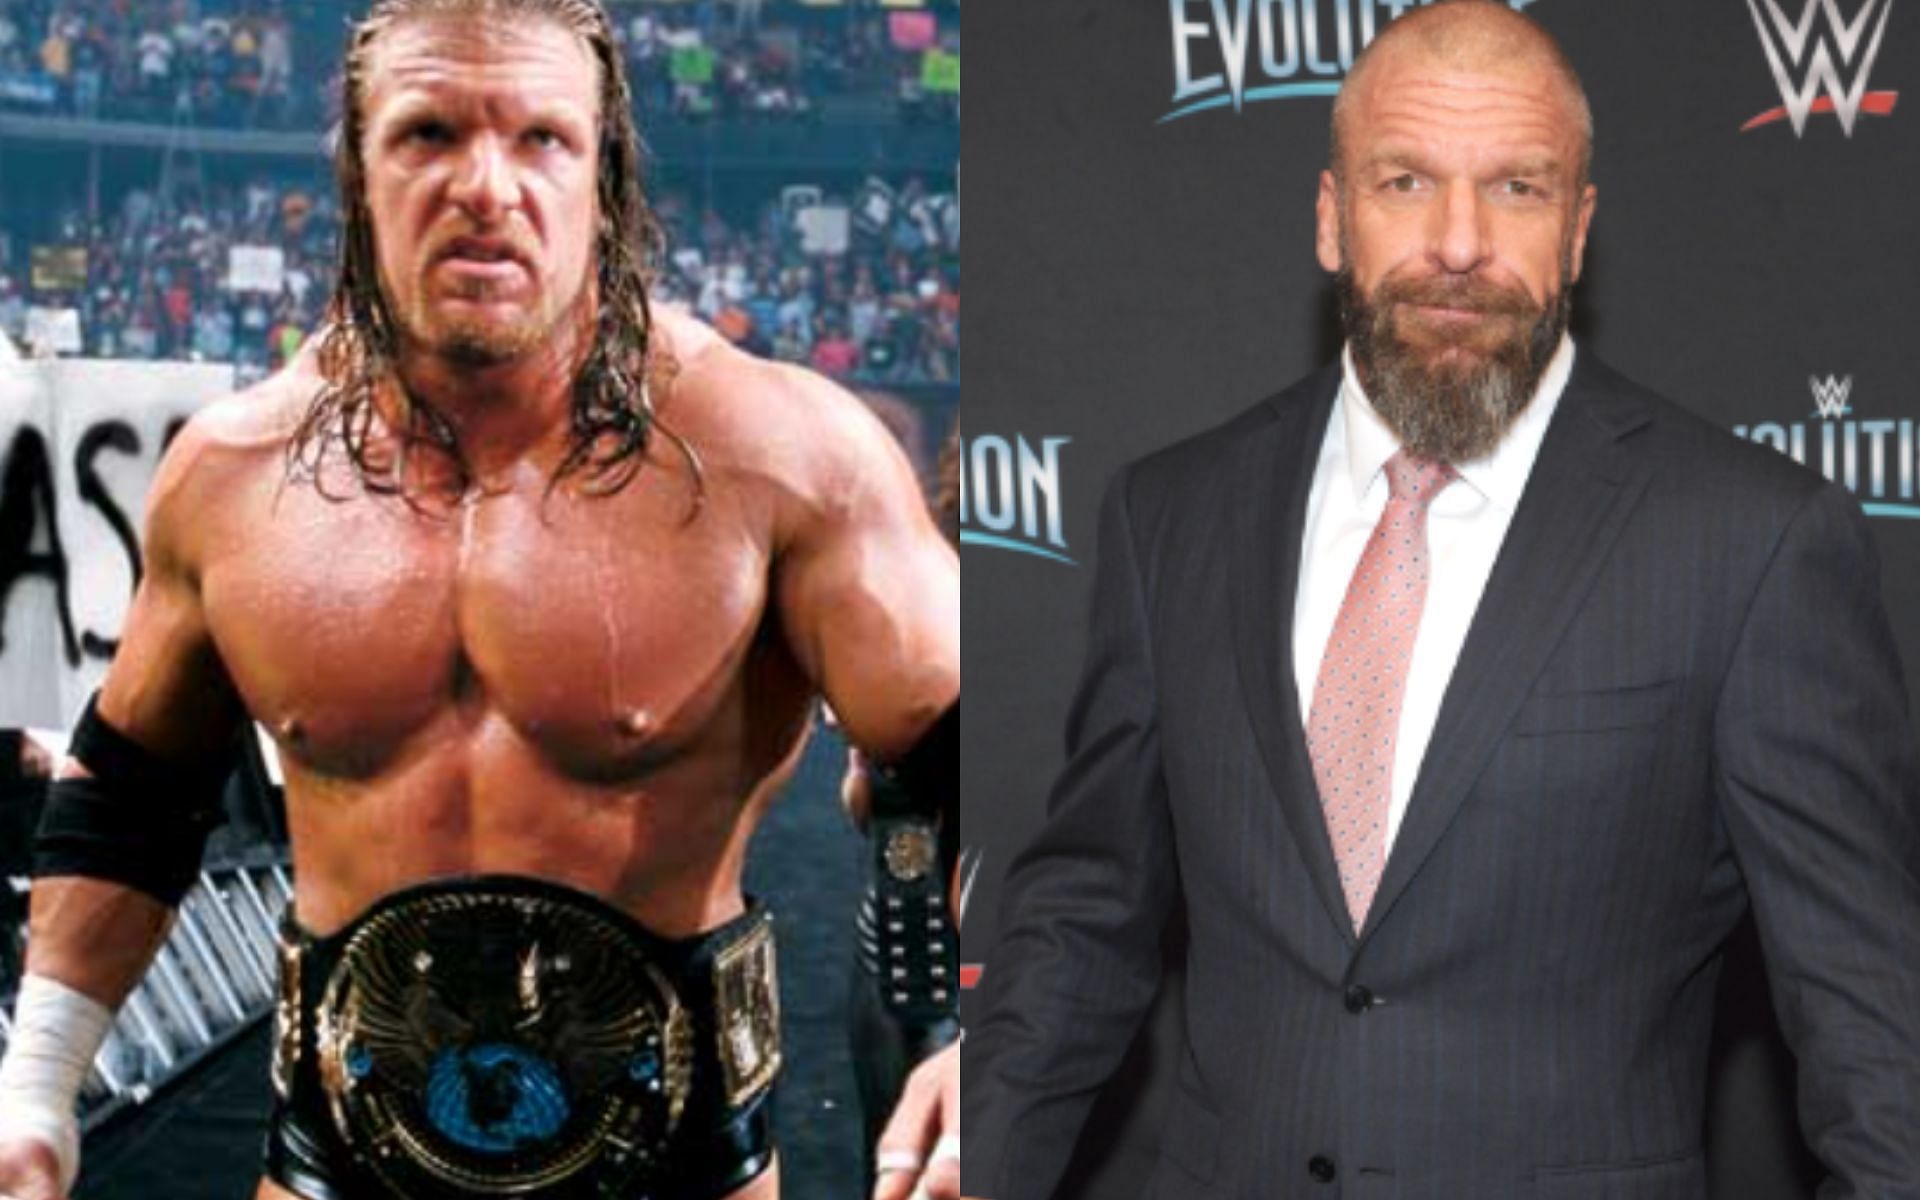 Triple H was a prominent name during the Attitude Era